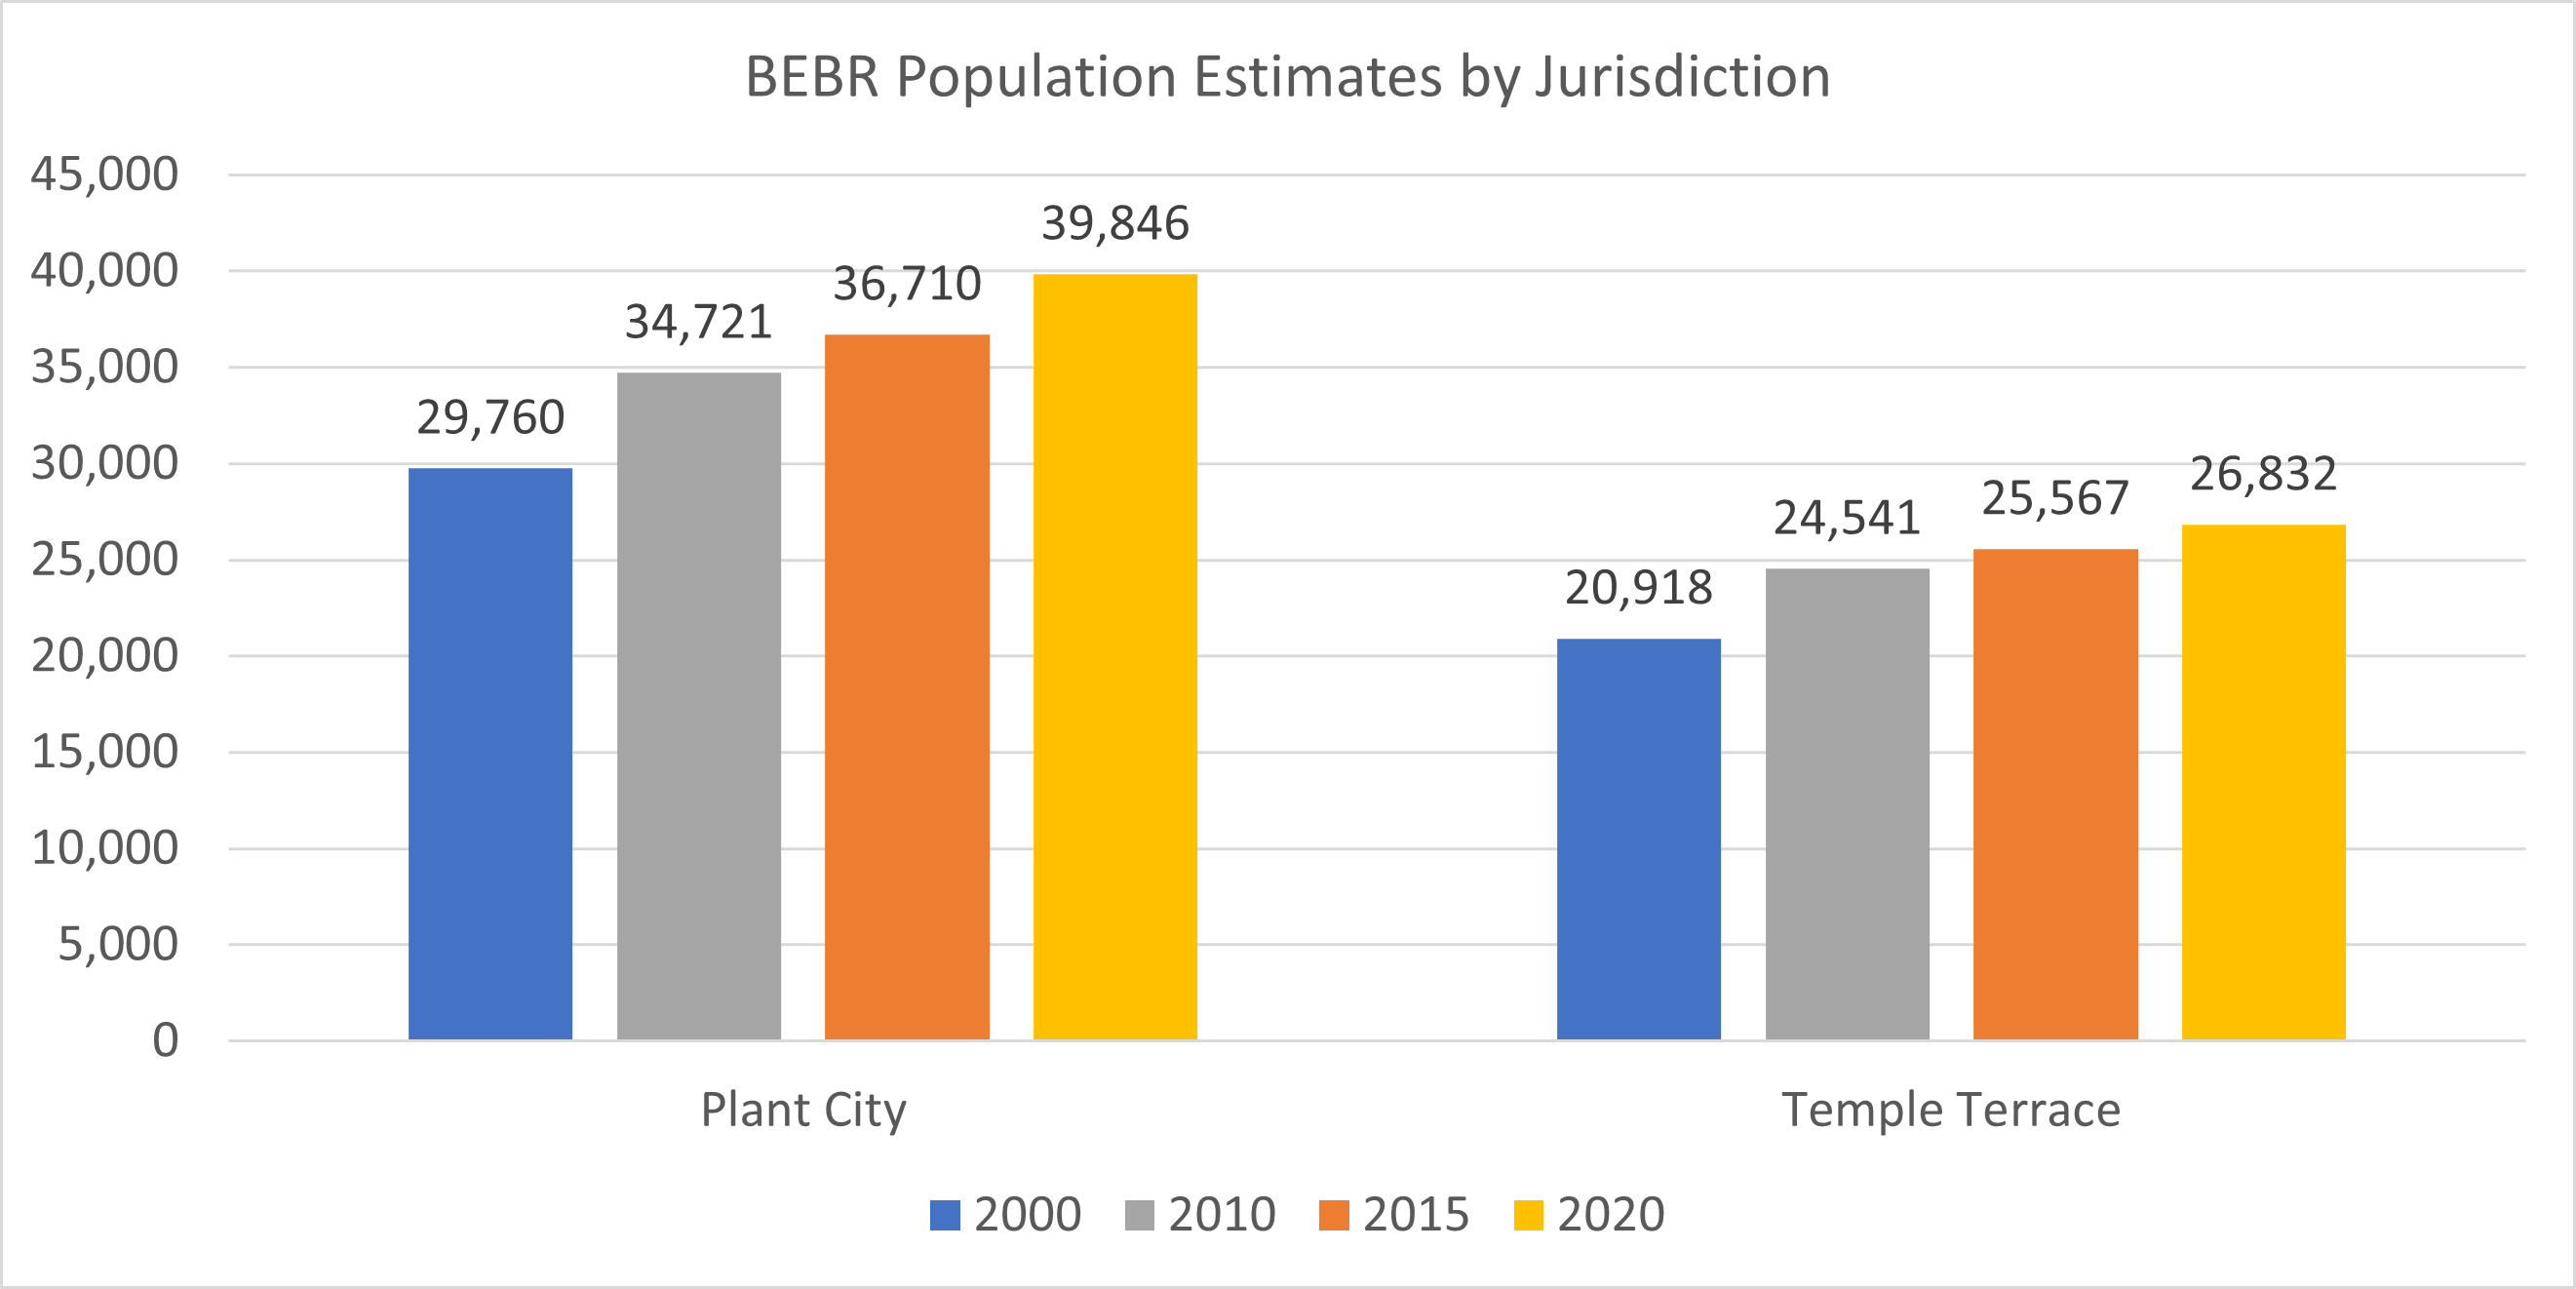 This bar chart shows BEBR population estimates for 2000, 2010, 2015, and 2020.  Plant City population grew from 29,760 persons in 2000 to 34,721 persons in 2010 to 39,846 persons in 2020.  Meanwhile, Temple Terrace population grew from 20,918 persons in 2000 to 24541 persons in 2010 to 26,832 persons in 2020.